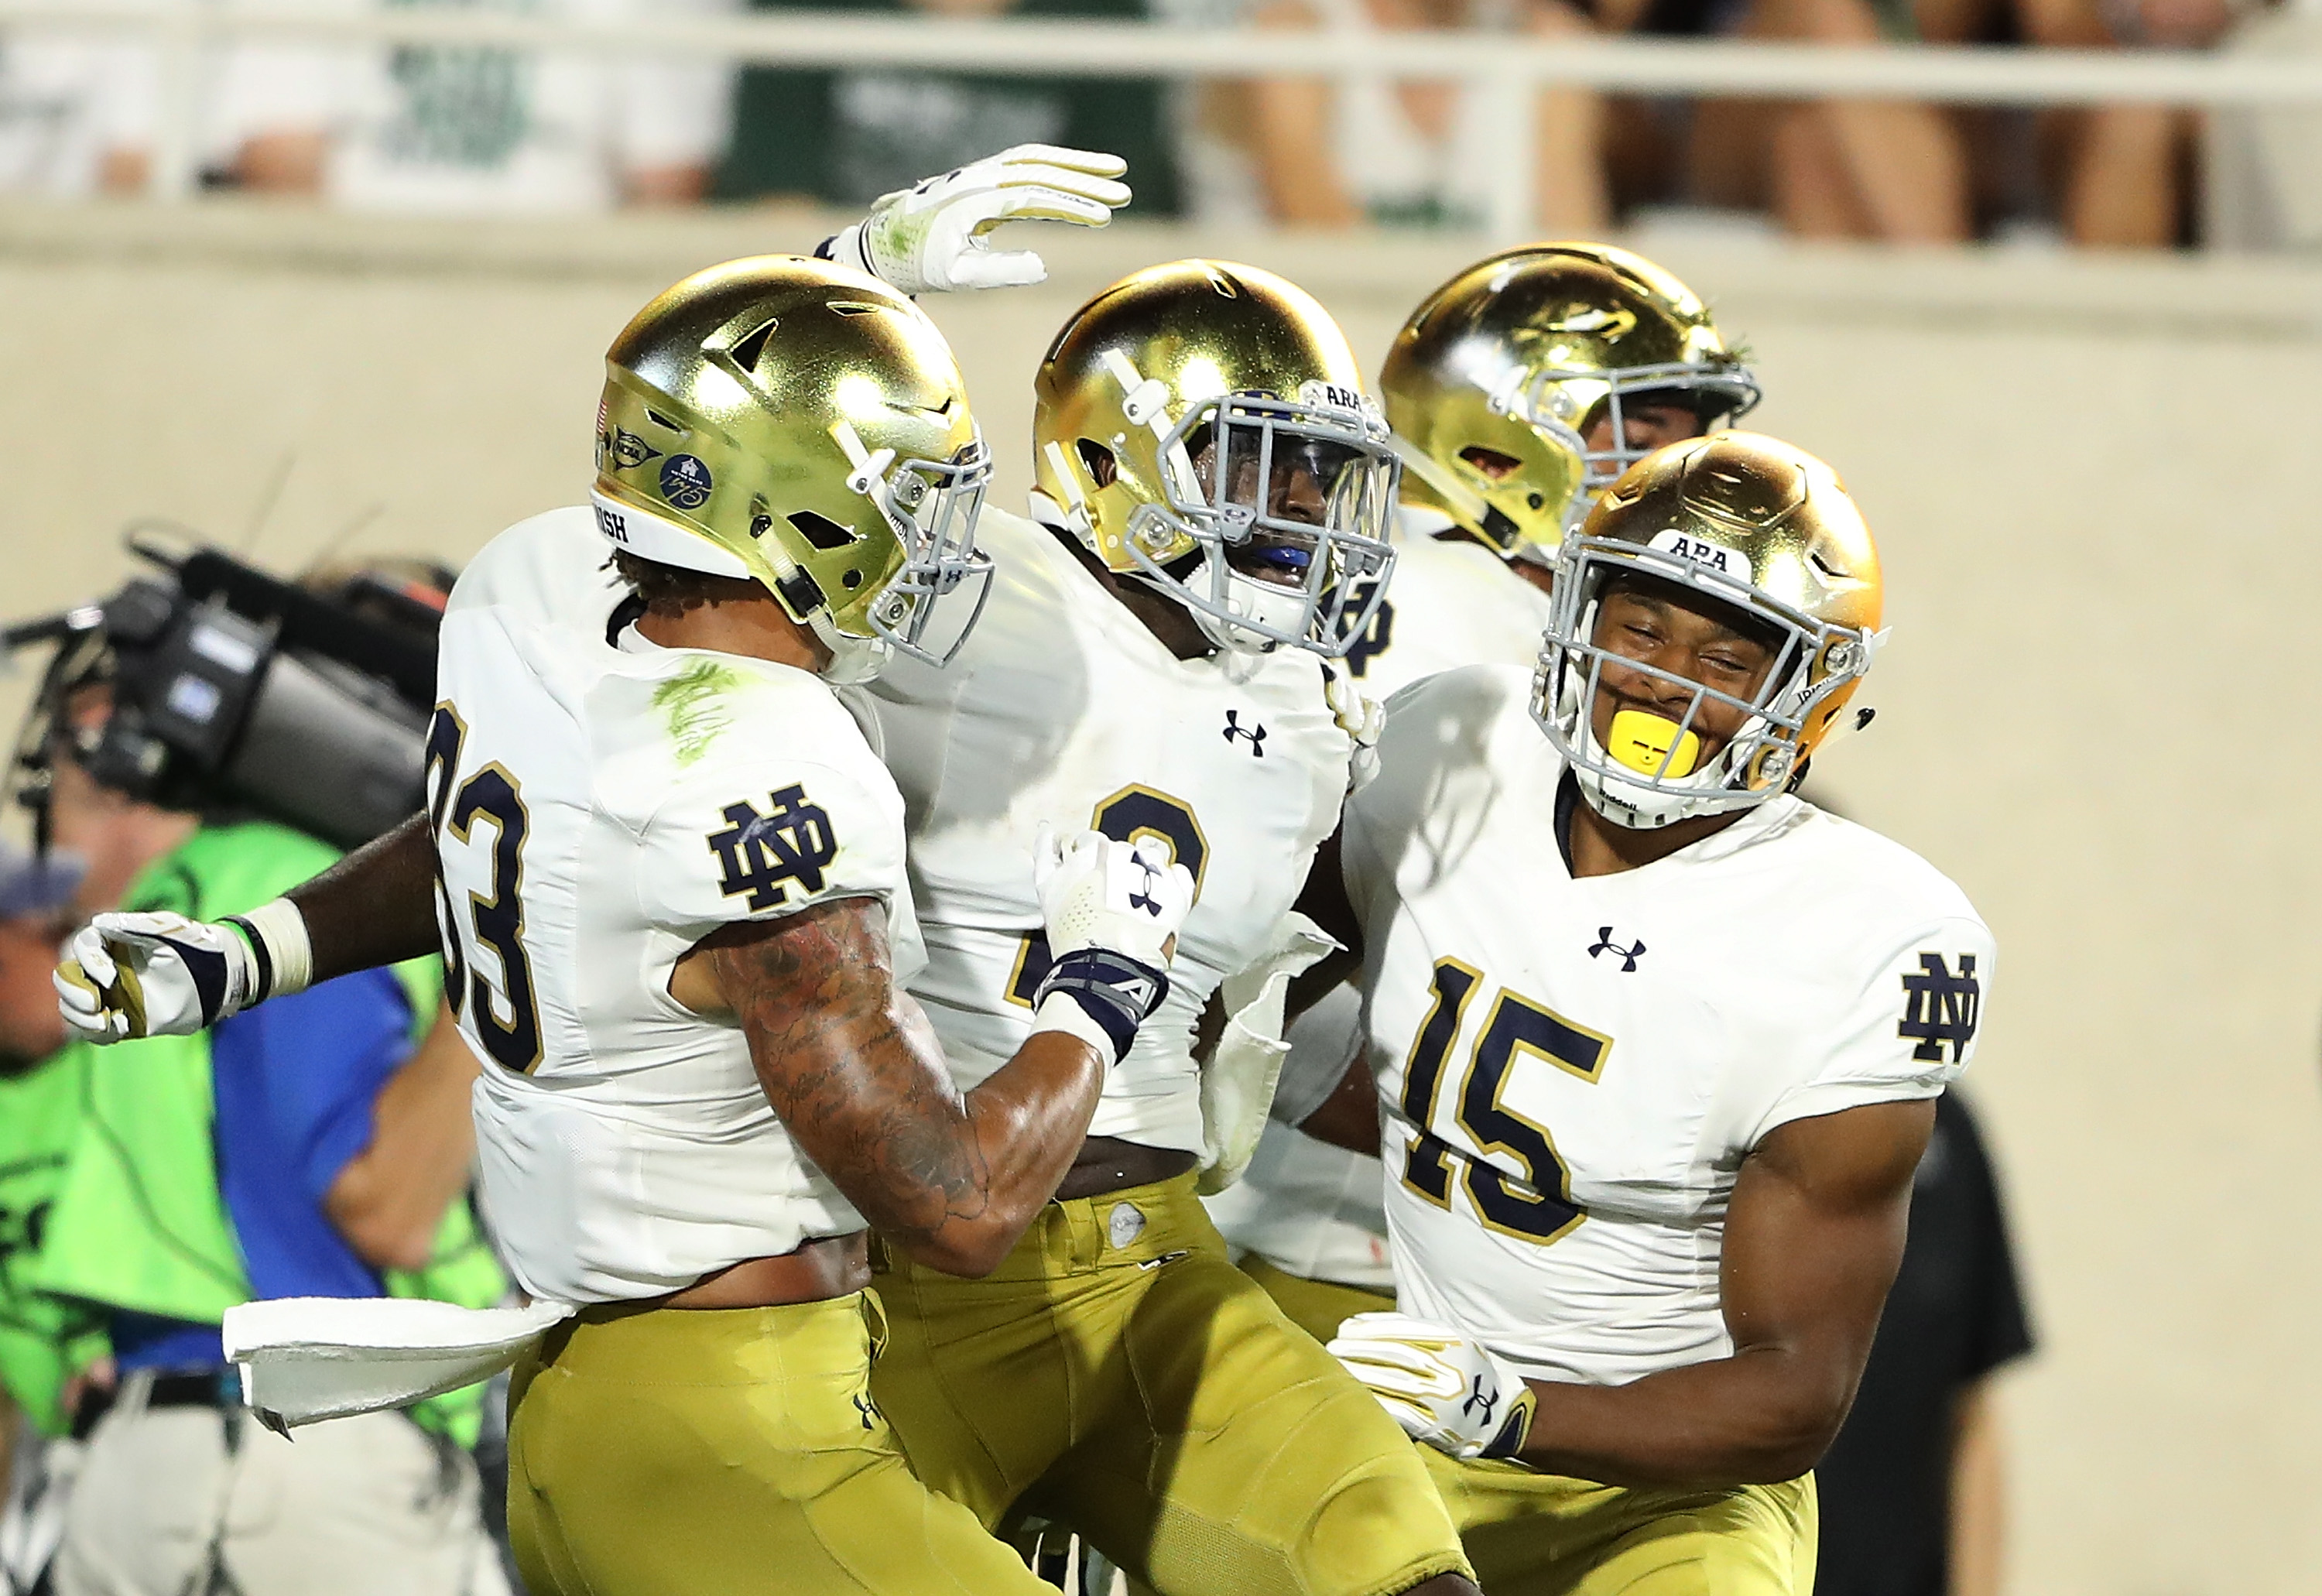 Notre Dame Football: Phil Steele Has High Hopes For The Irish In 2018